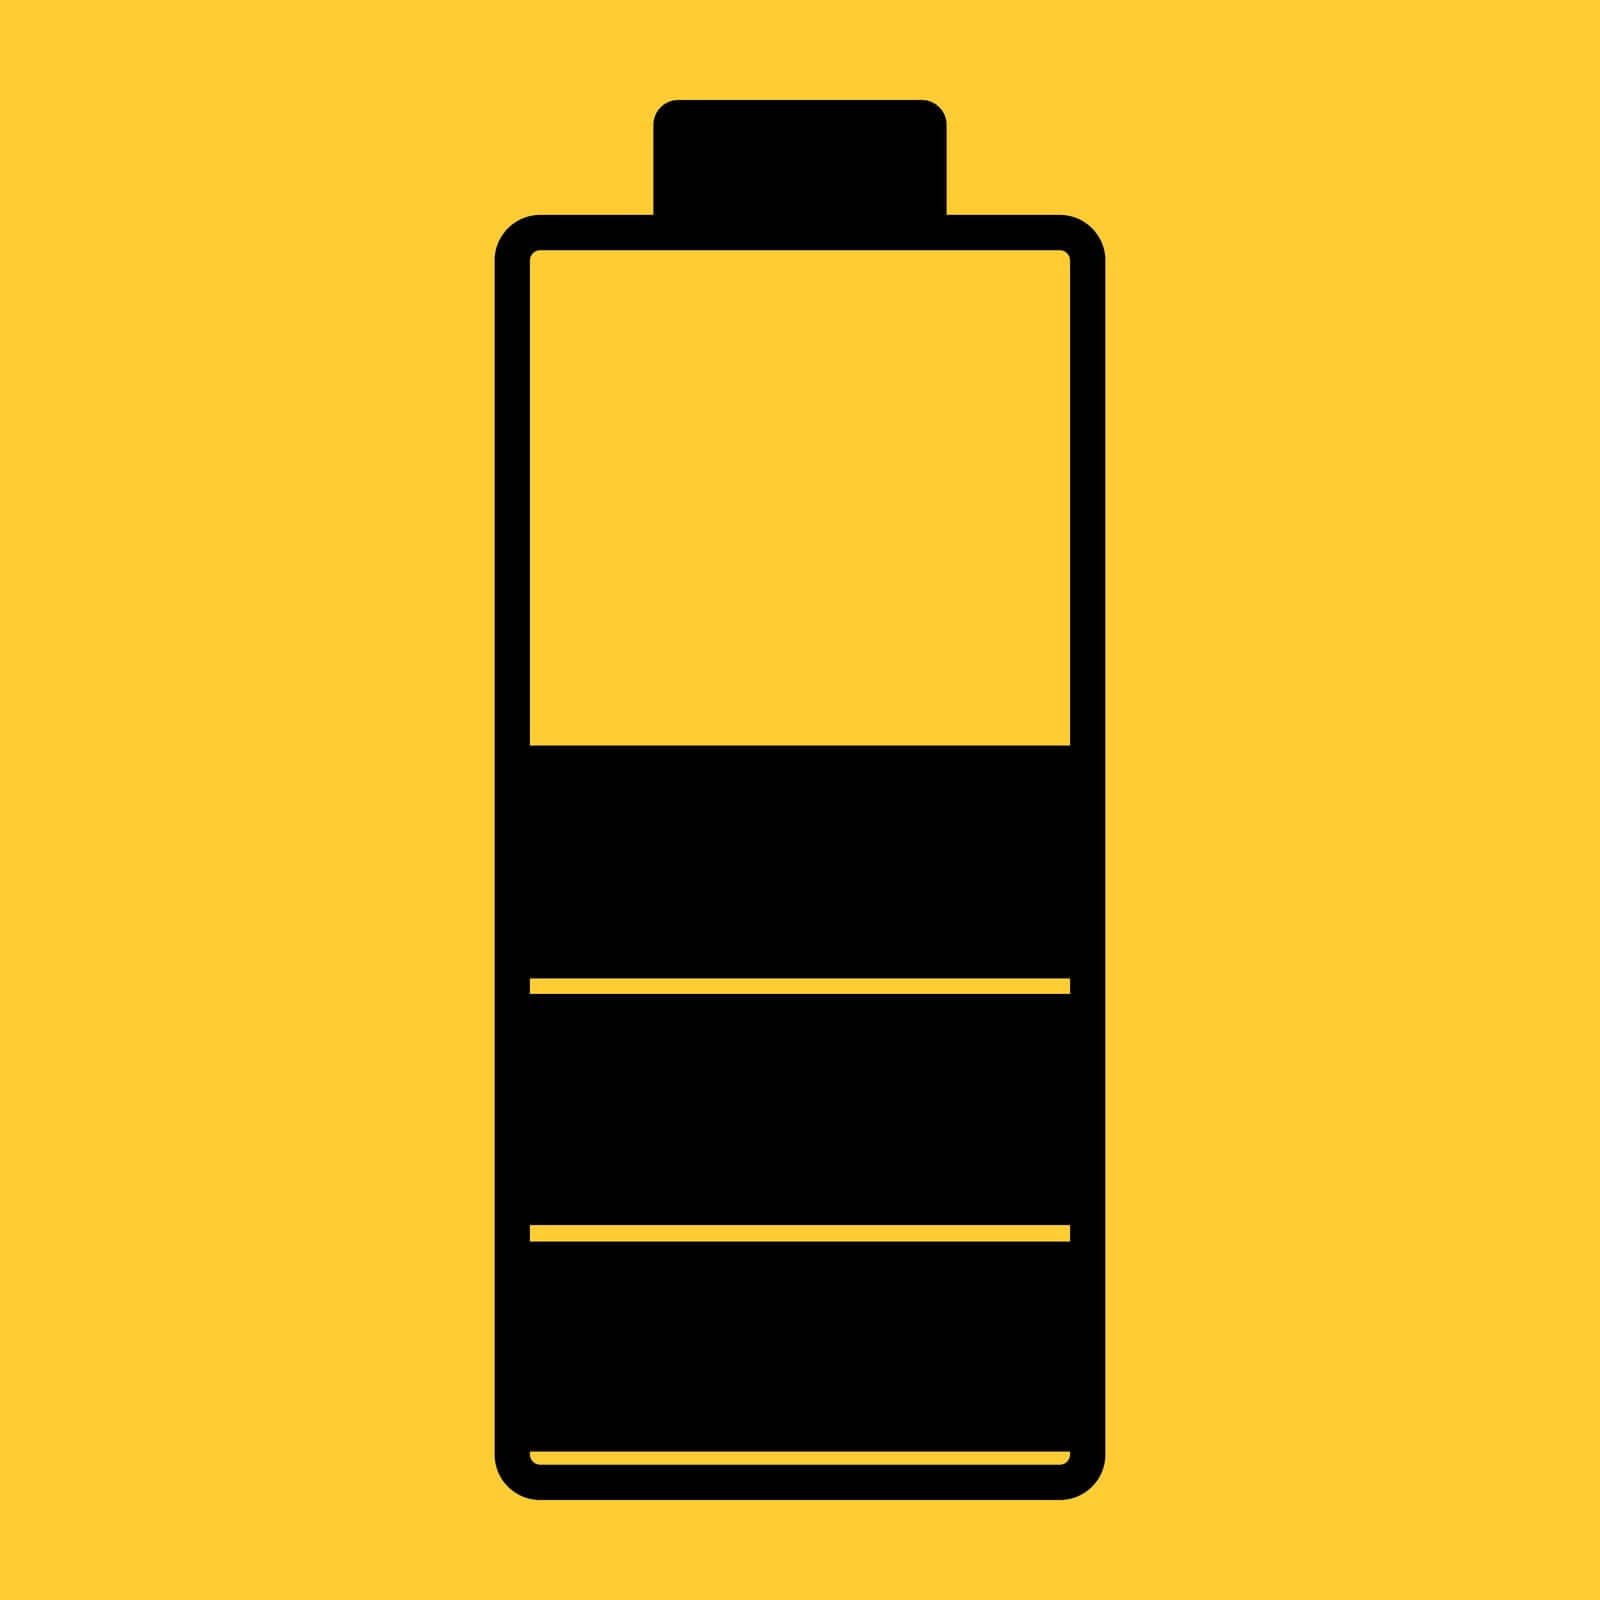 Half battery illustration. Black and yellow colors. Vector icon